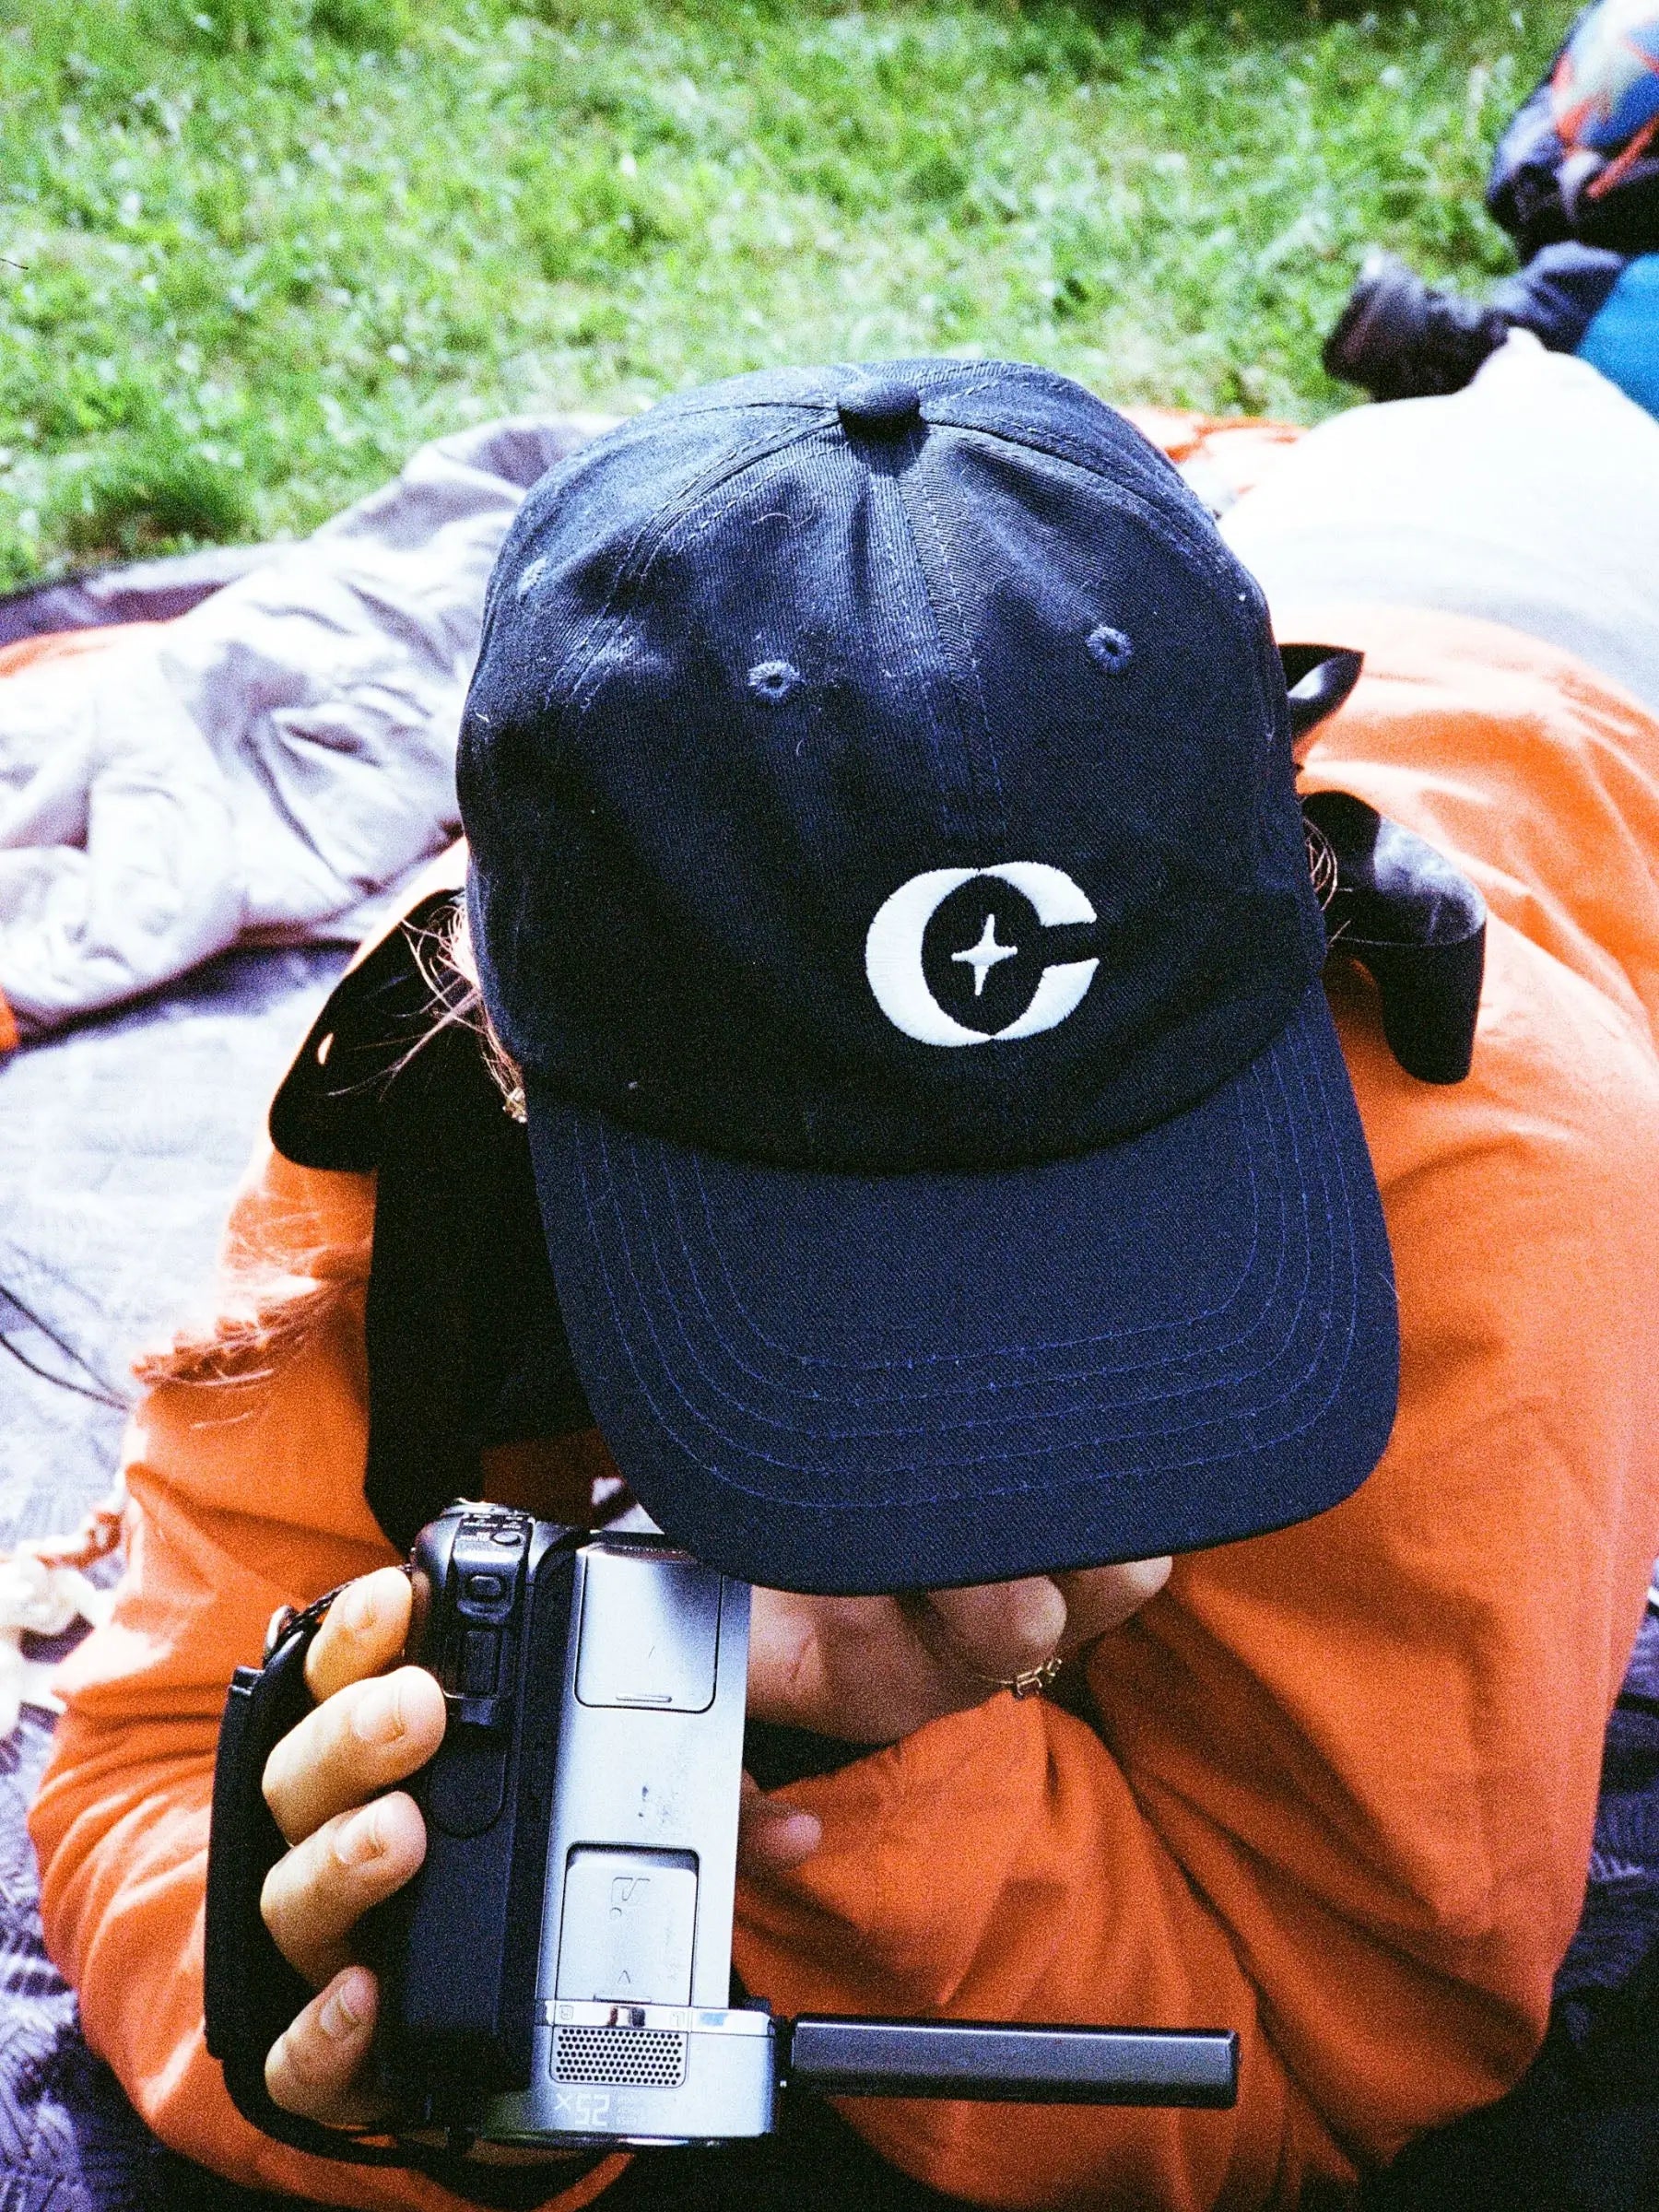 a person wearing a hat and holding a camera